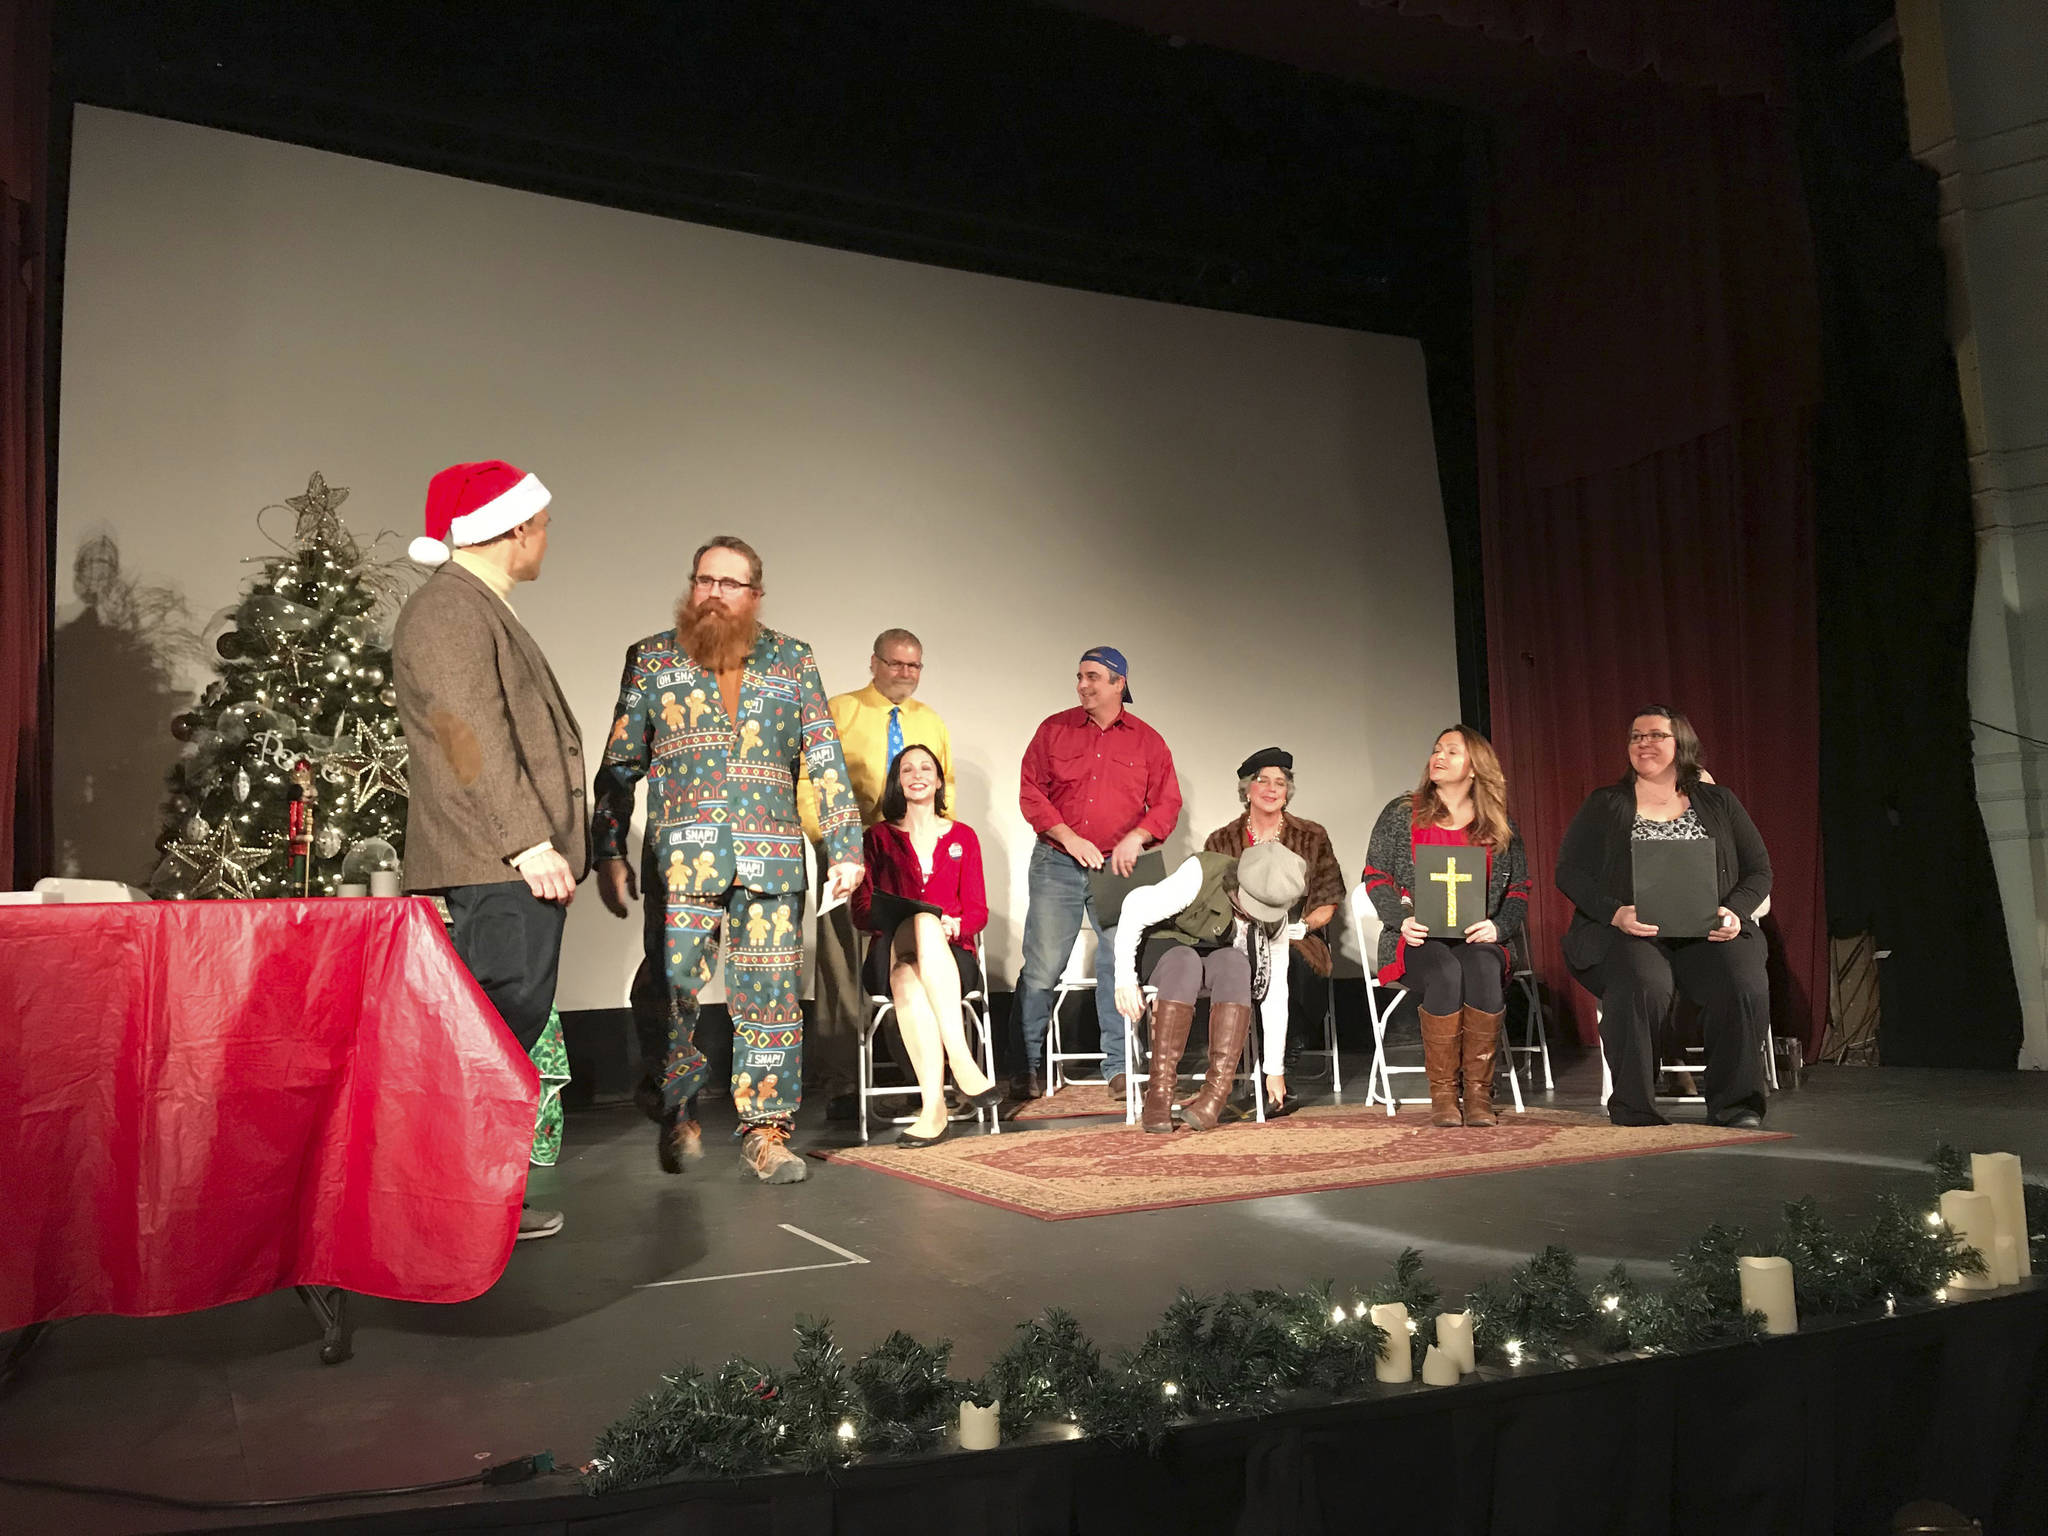 Church to perform zany ‘Christmas Choir’ comedy to support foster children during holidays